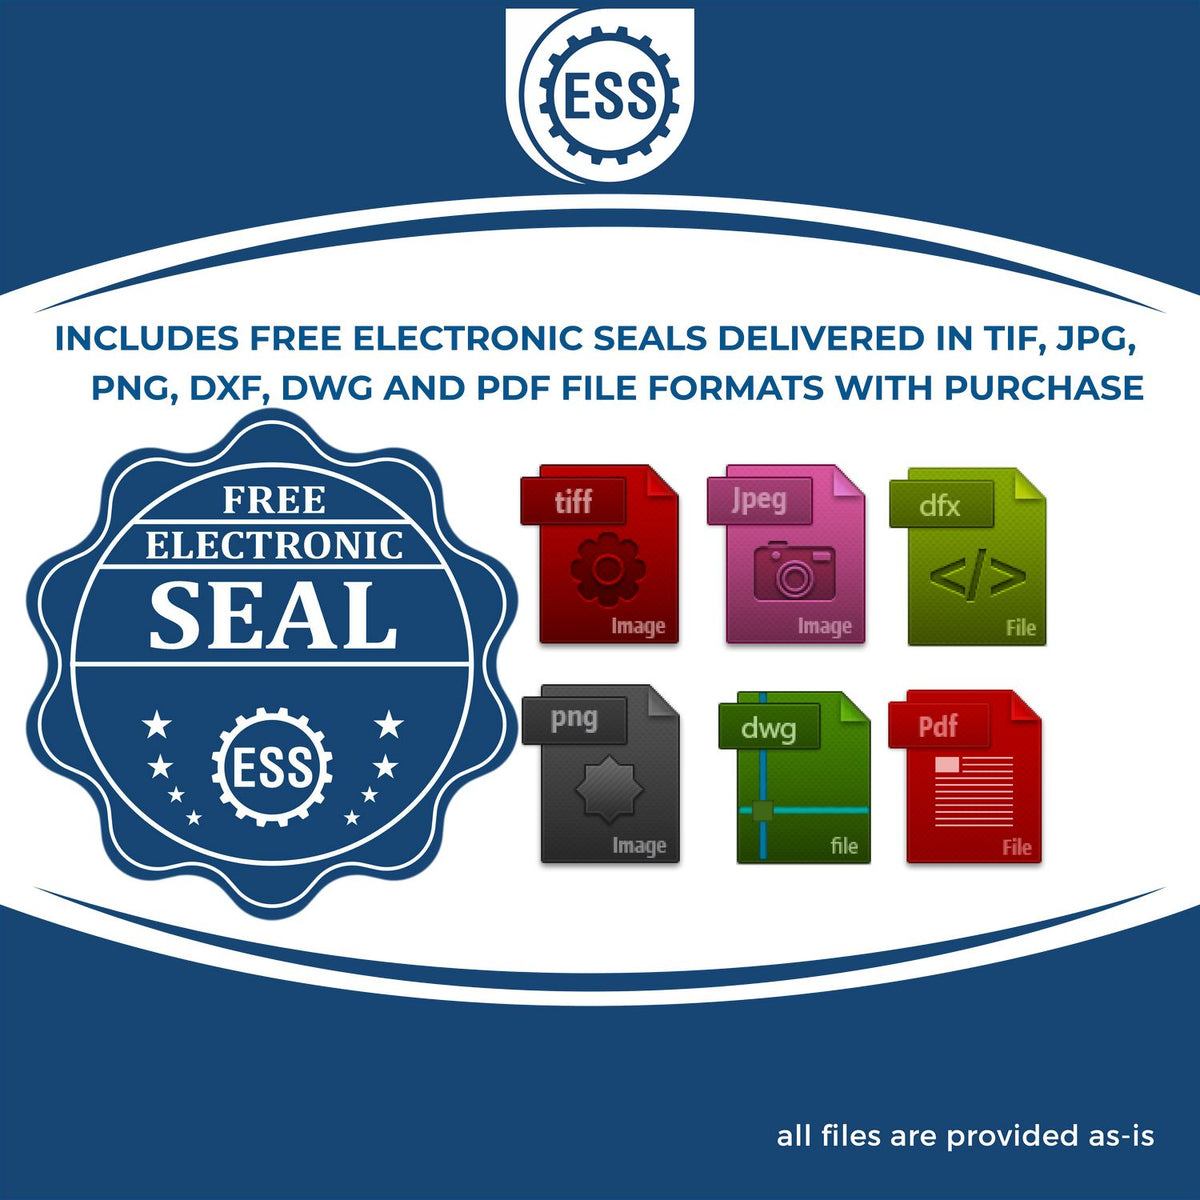 An infographic for the free electronic seal for the Gift Maryland Geologist Seal illustrating the different file type icons such as DXF, DWG, TIF, JPG and PNG.